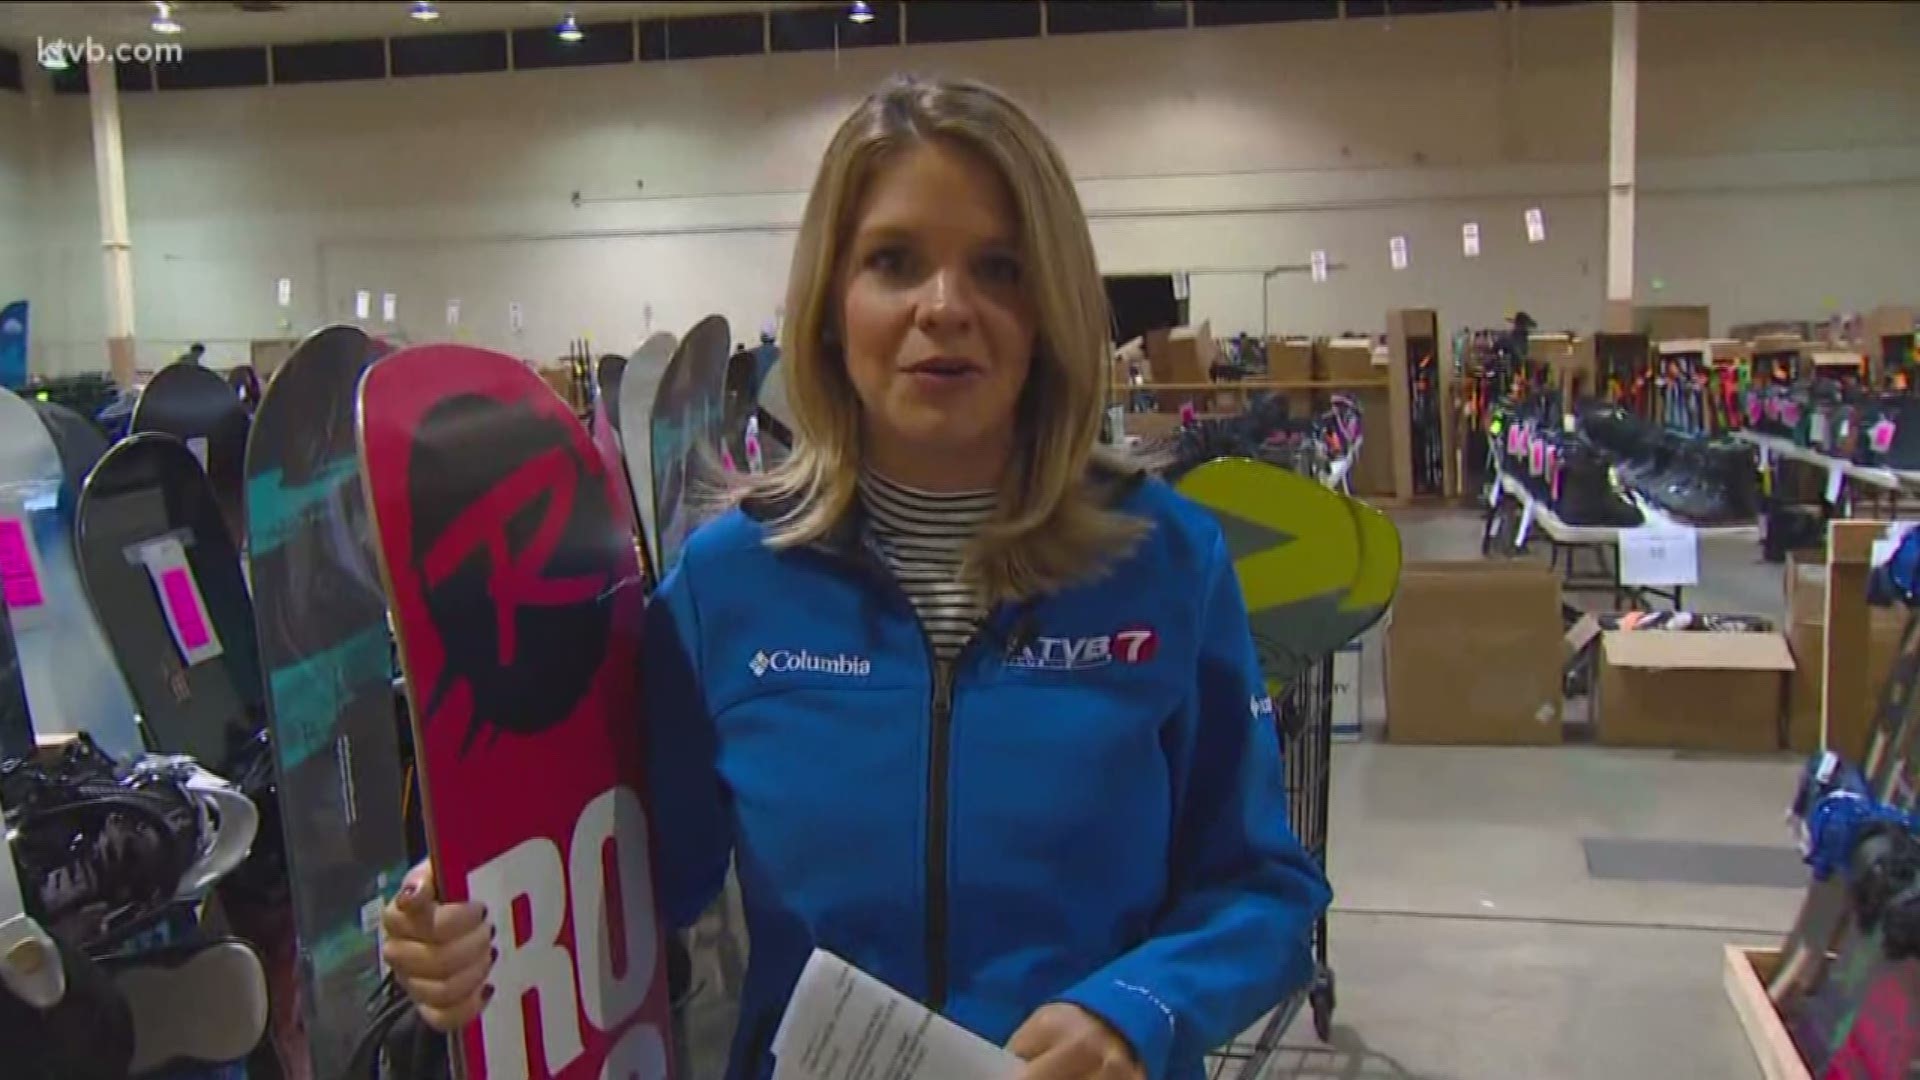 Whatever you need for the upcoming ski season, you'll find it at the ski swap.